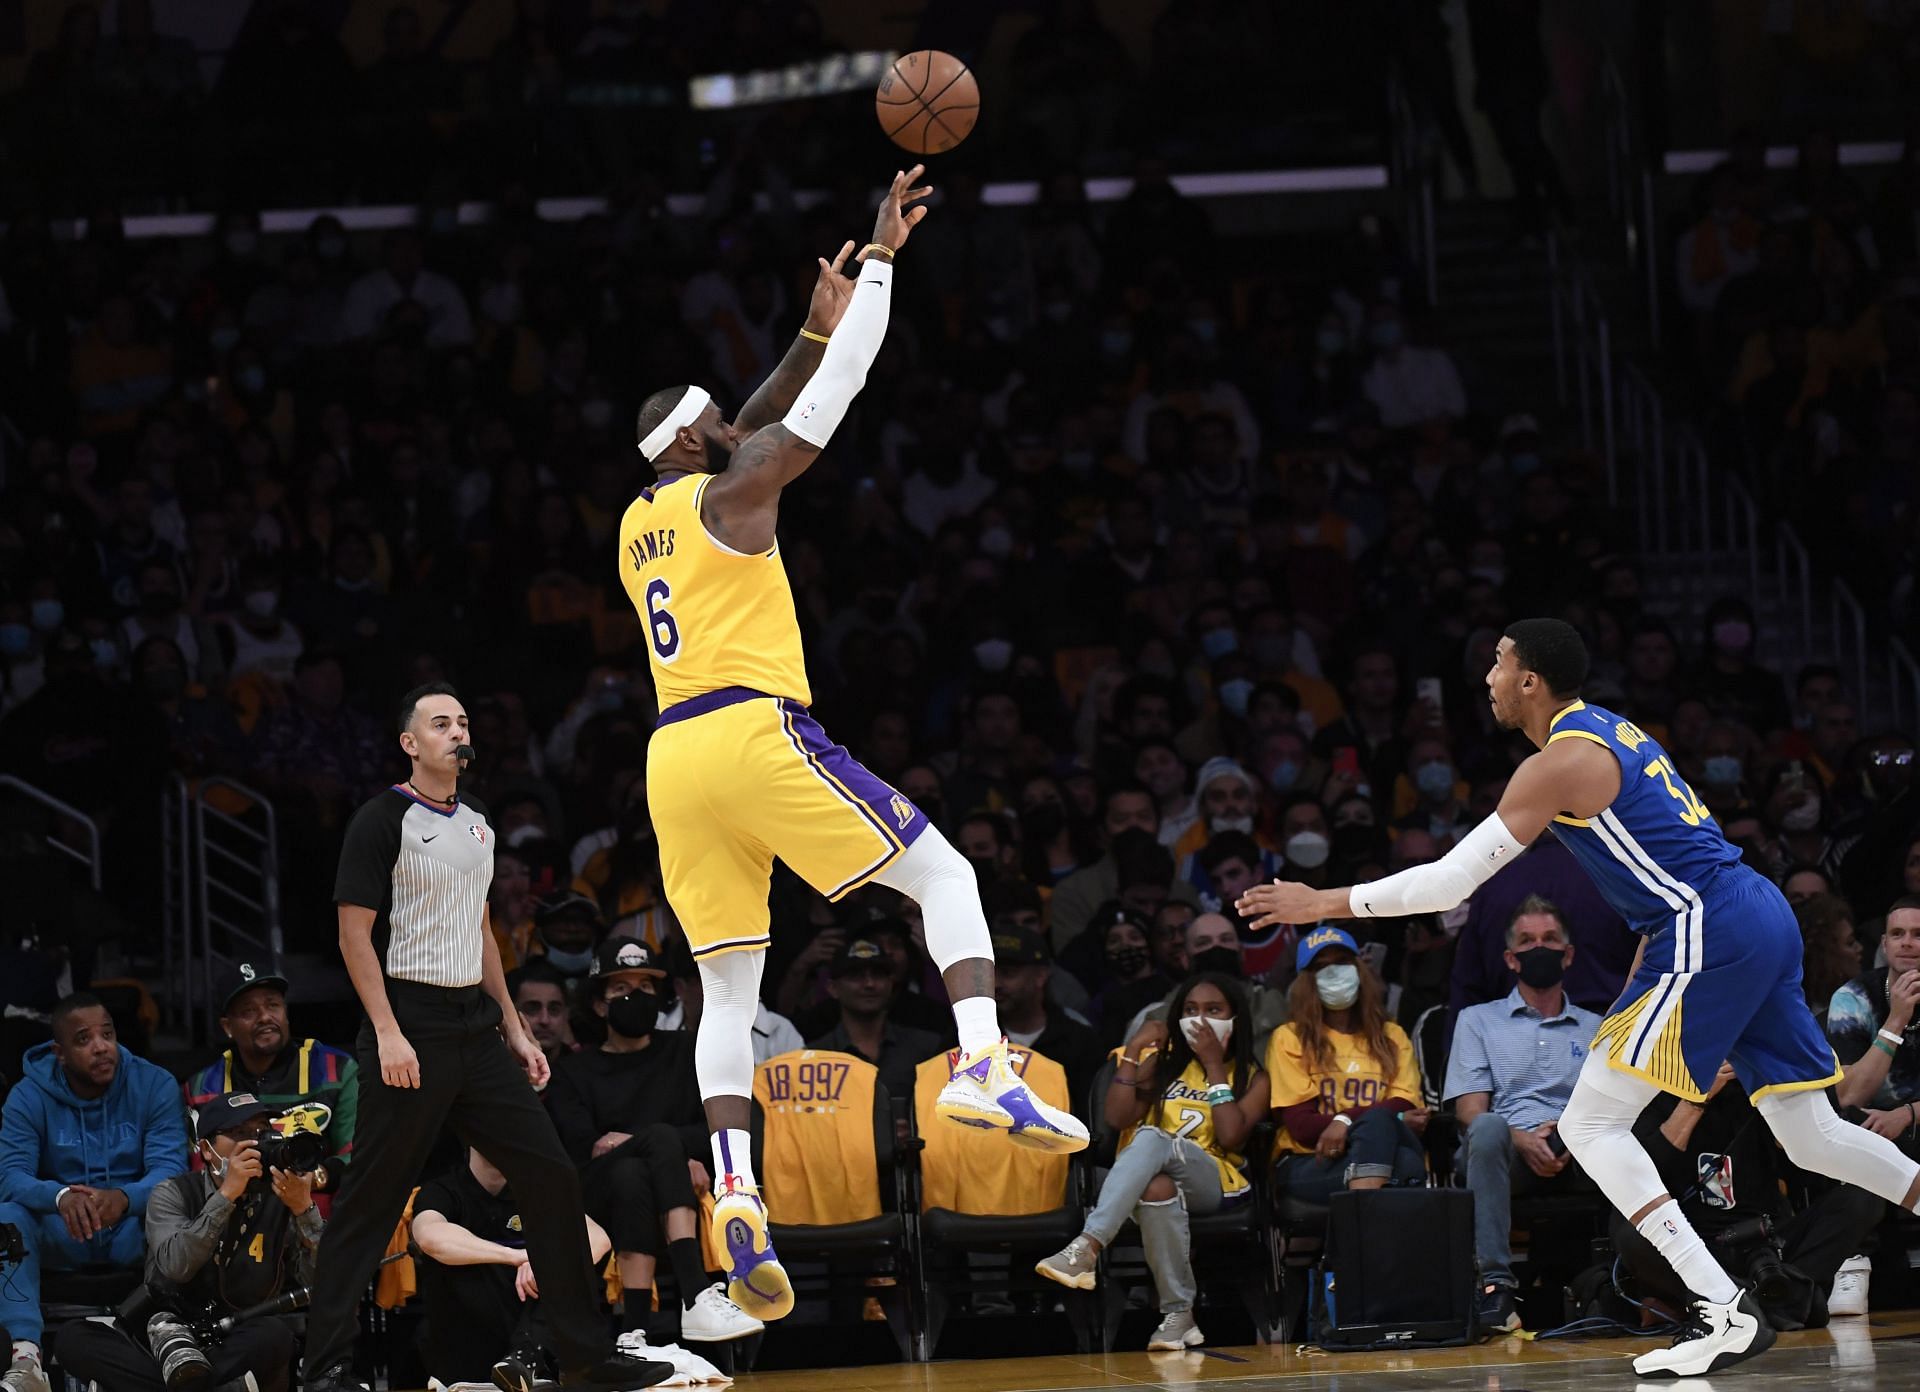 LeBron James #6 of the LA Lakers shoots a three-point basket.